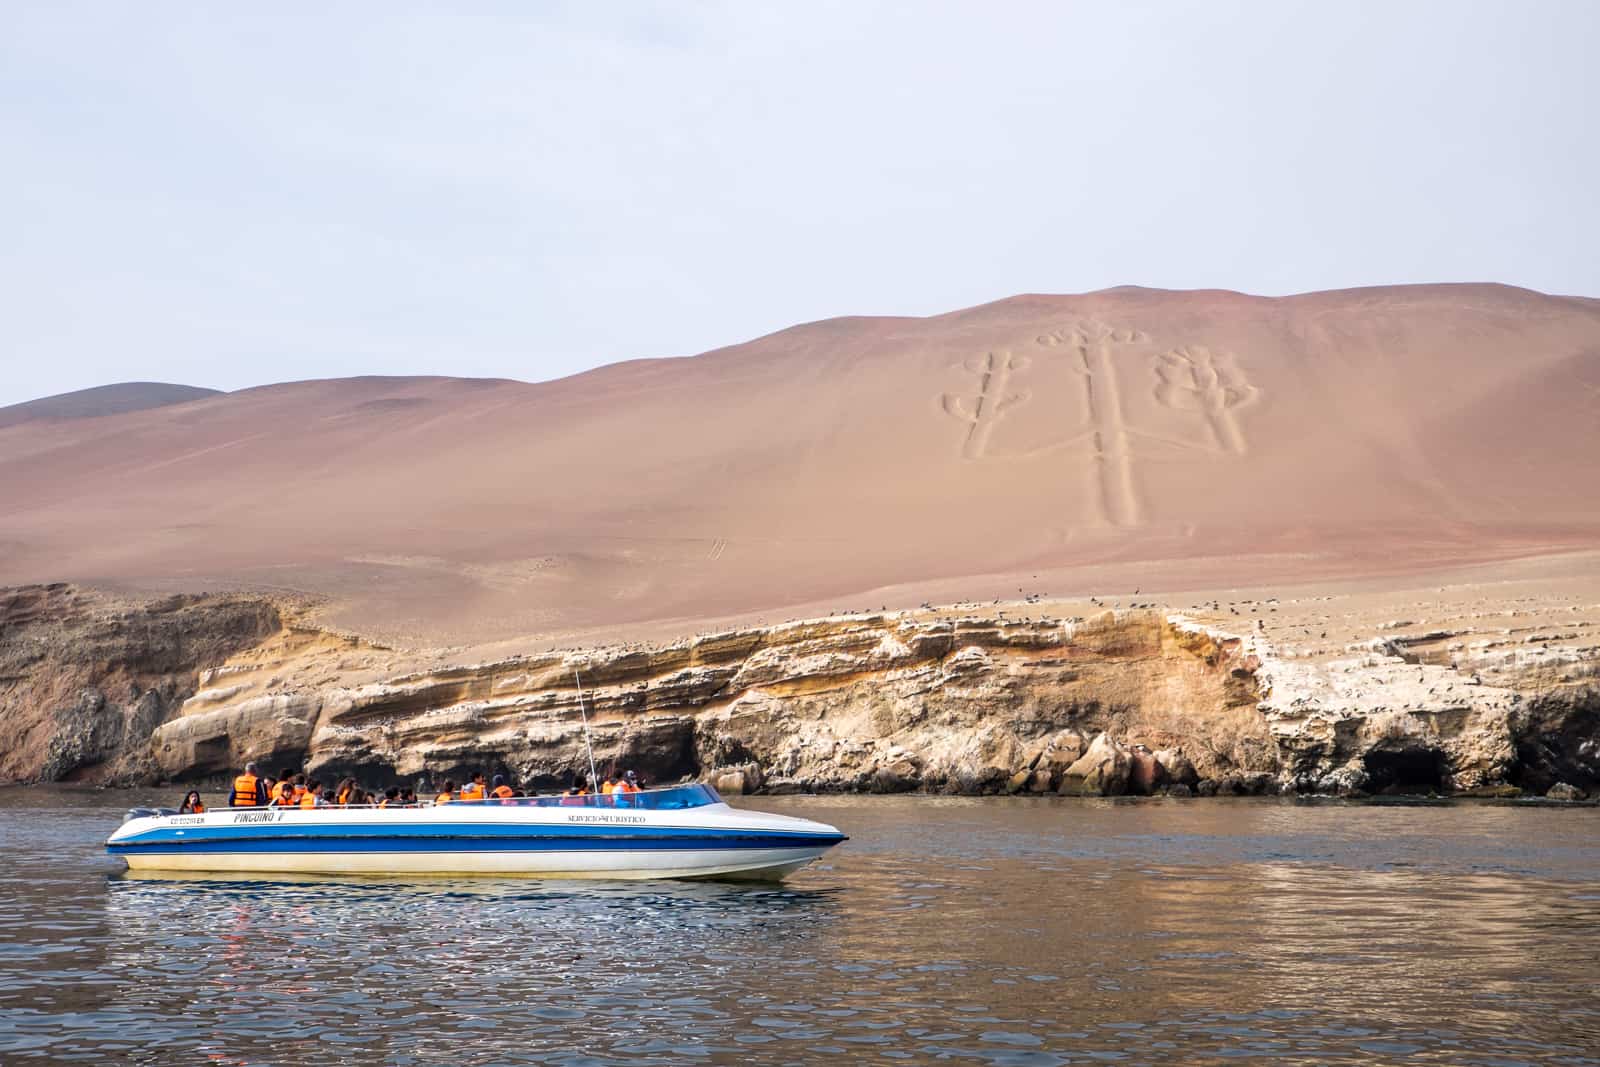 Peru sightseeing by boat to view the Paracas Candelabra carving in the rock hill in Ballestas Islands. 